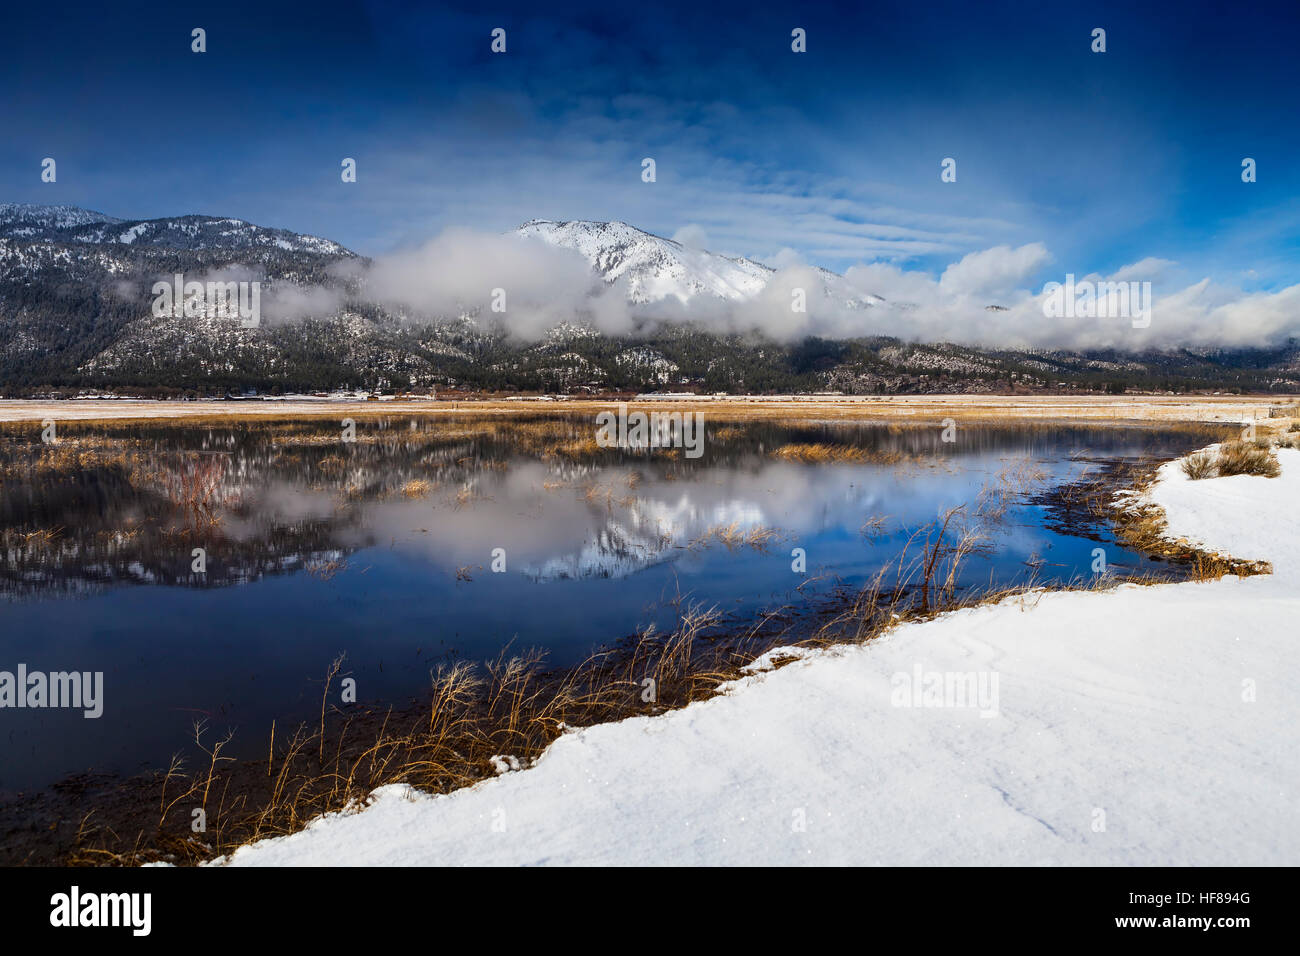 Washoe Valley, Nevada. Pond reflection and slide mountain in winter with snow. Stock Photo